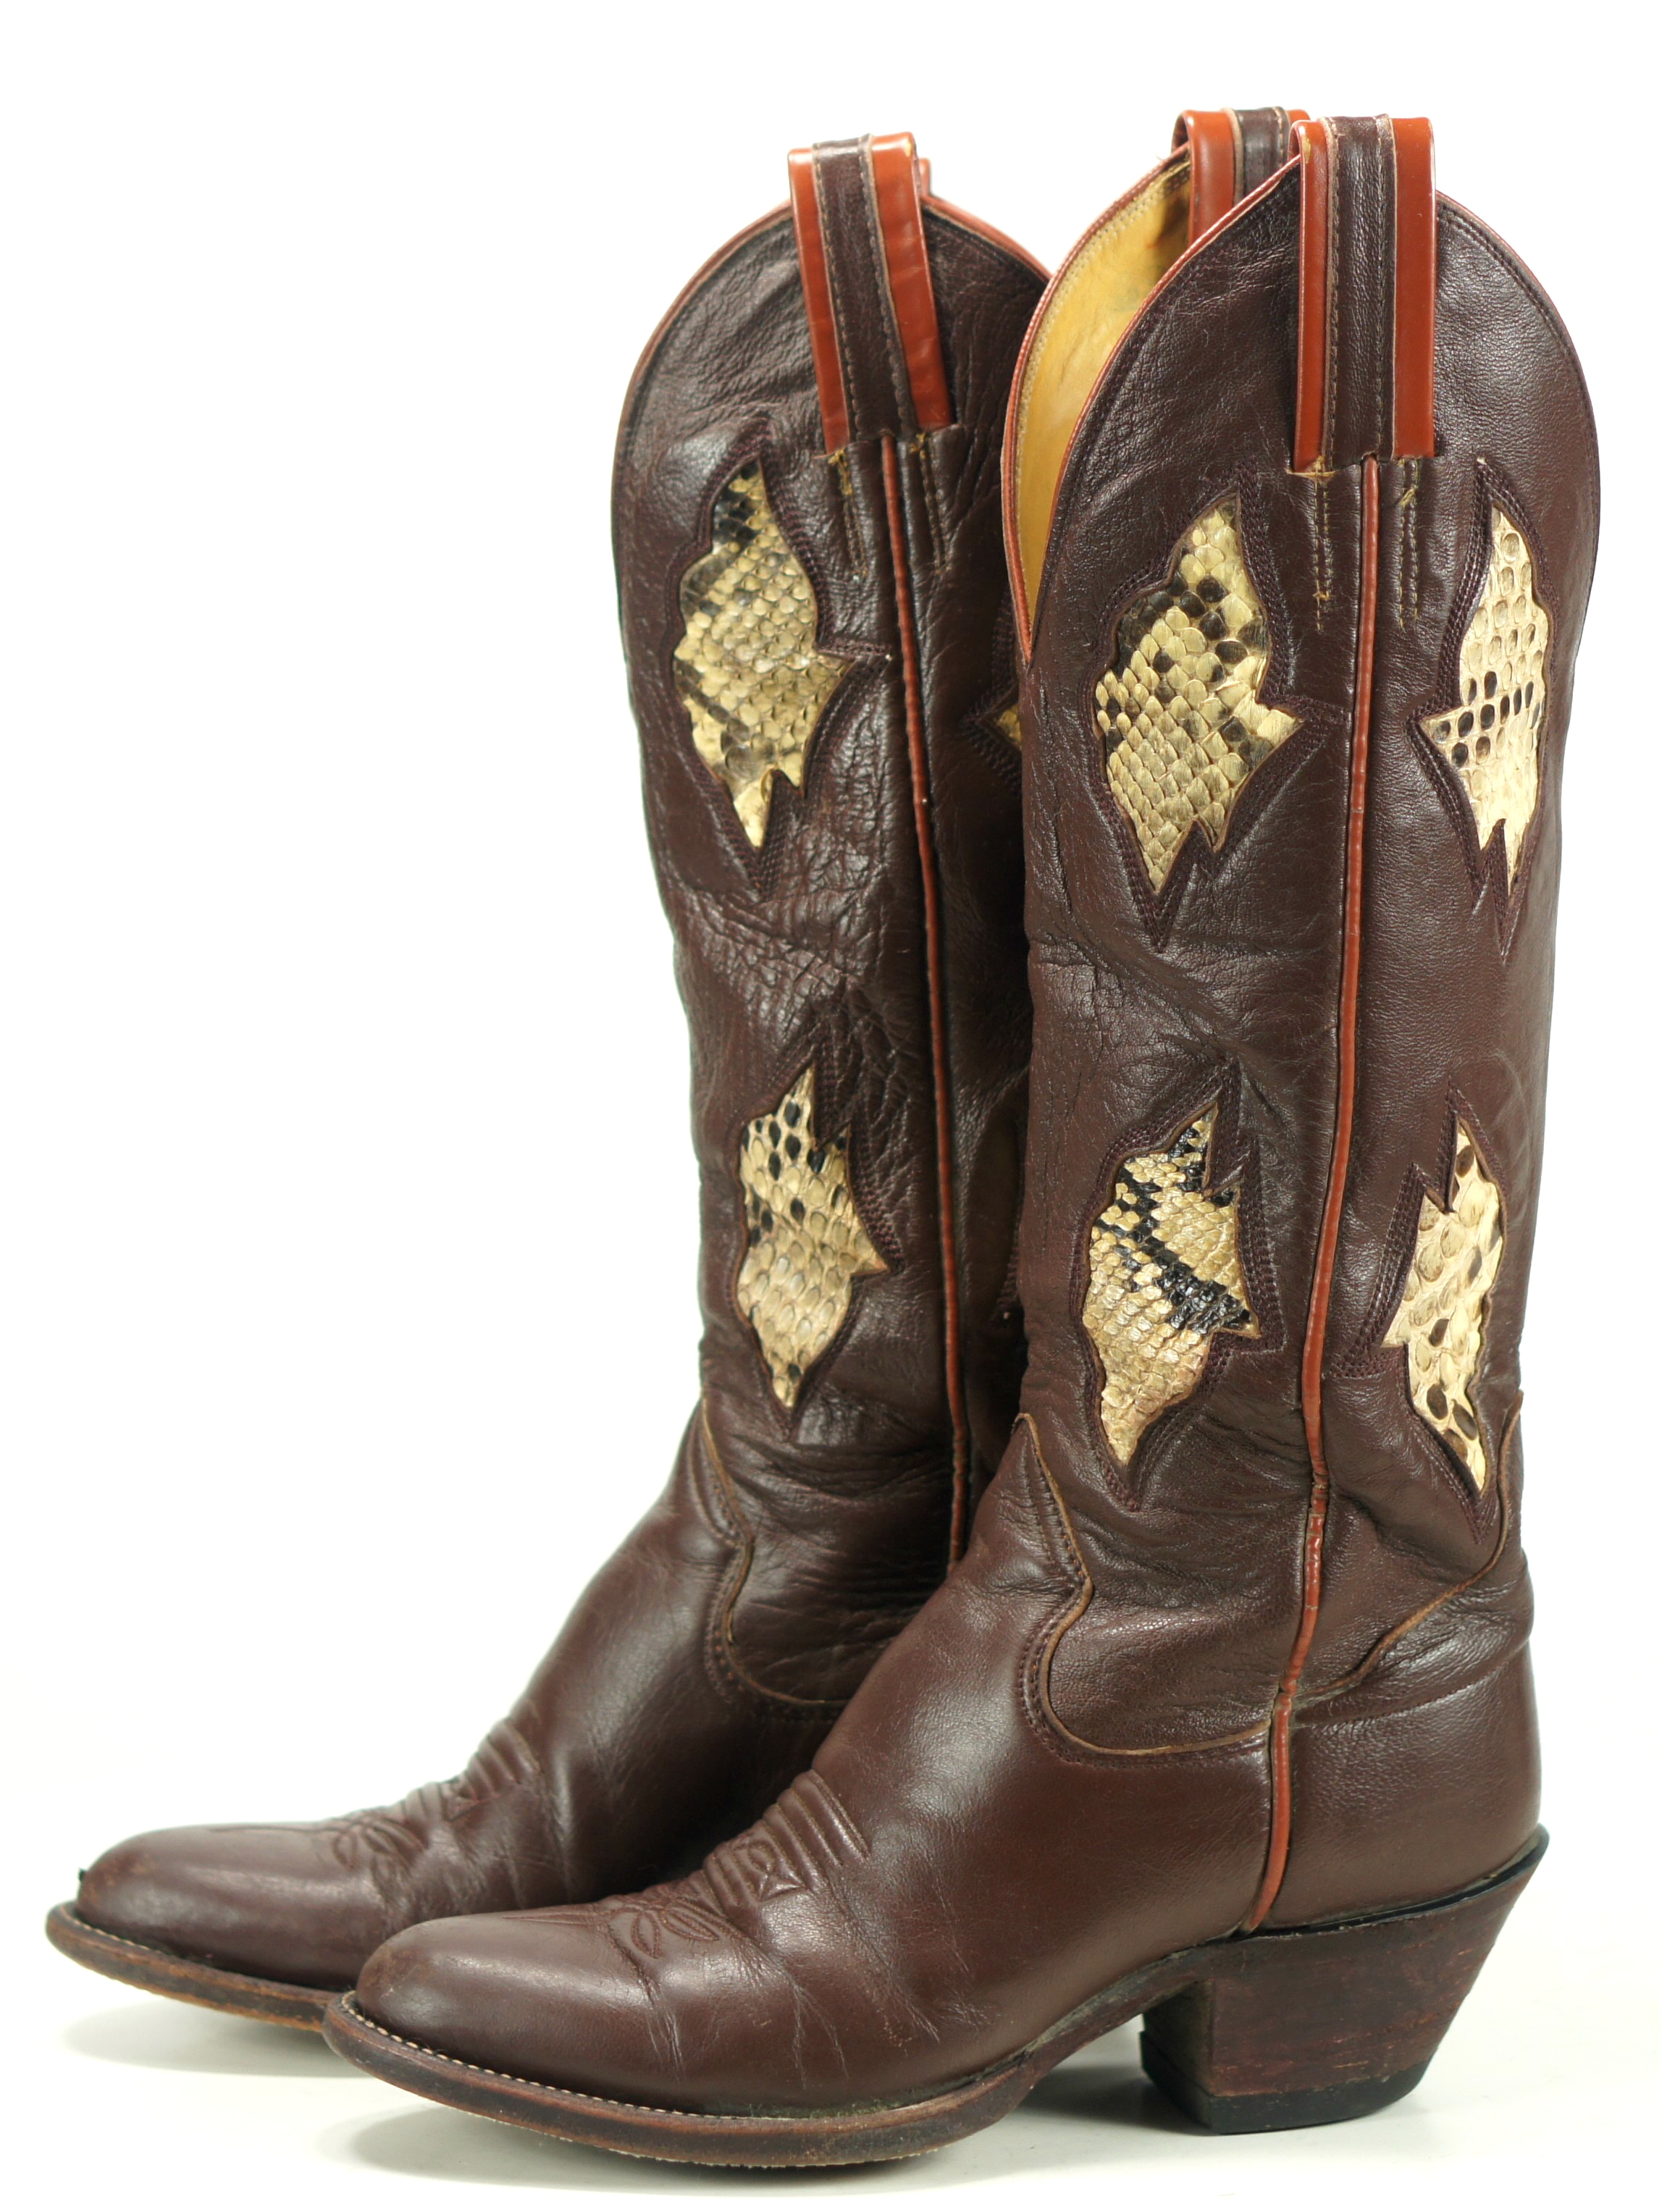 Sanders Vintage Womens 17 Inch Tall Cowboy Boots Brown Leather Inlay